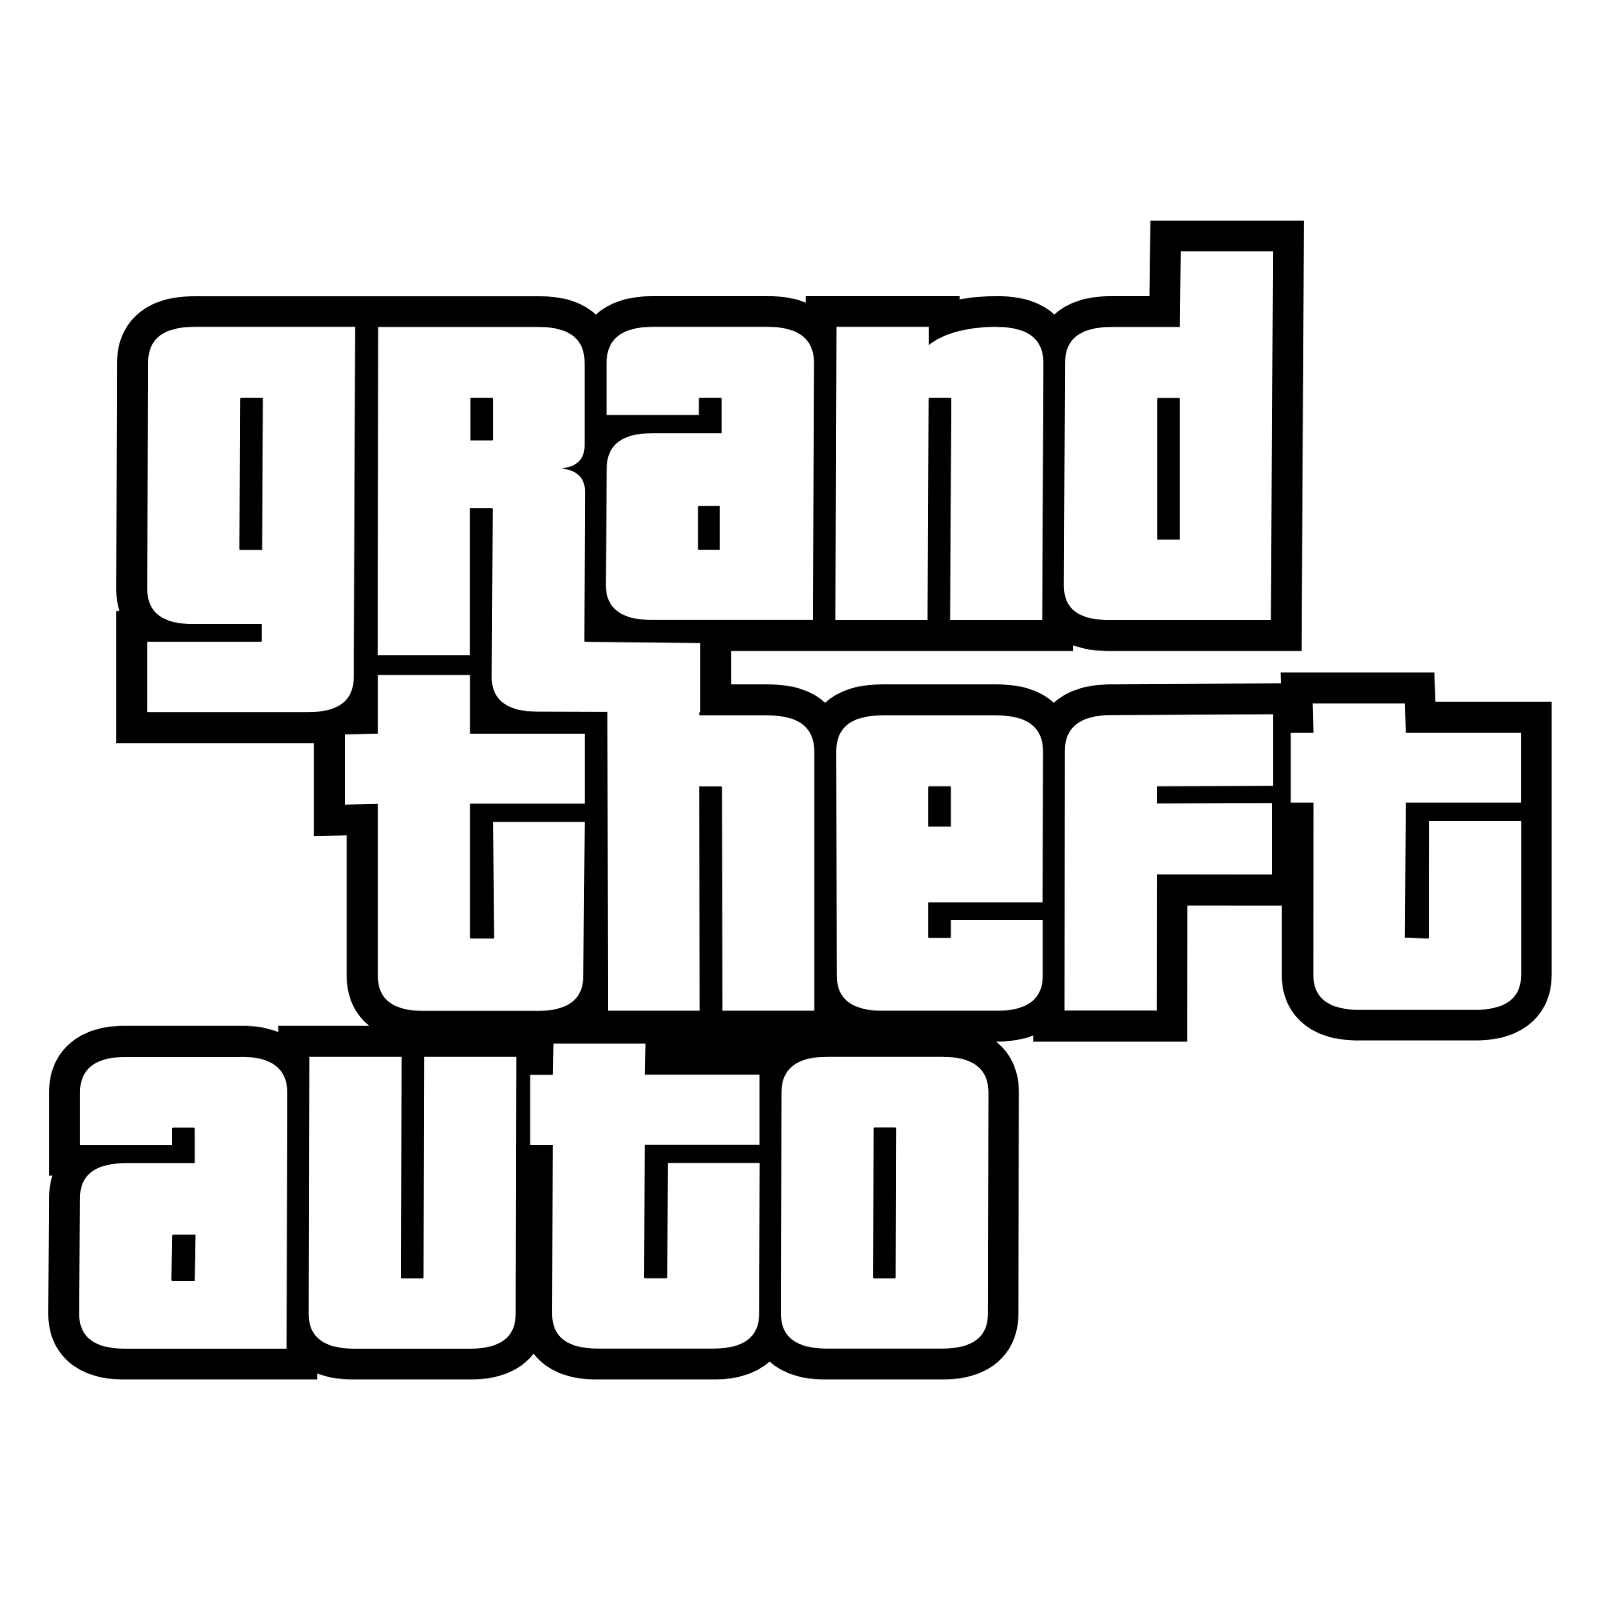 Area Auto Grand Iv Theft Text PNG Image